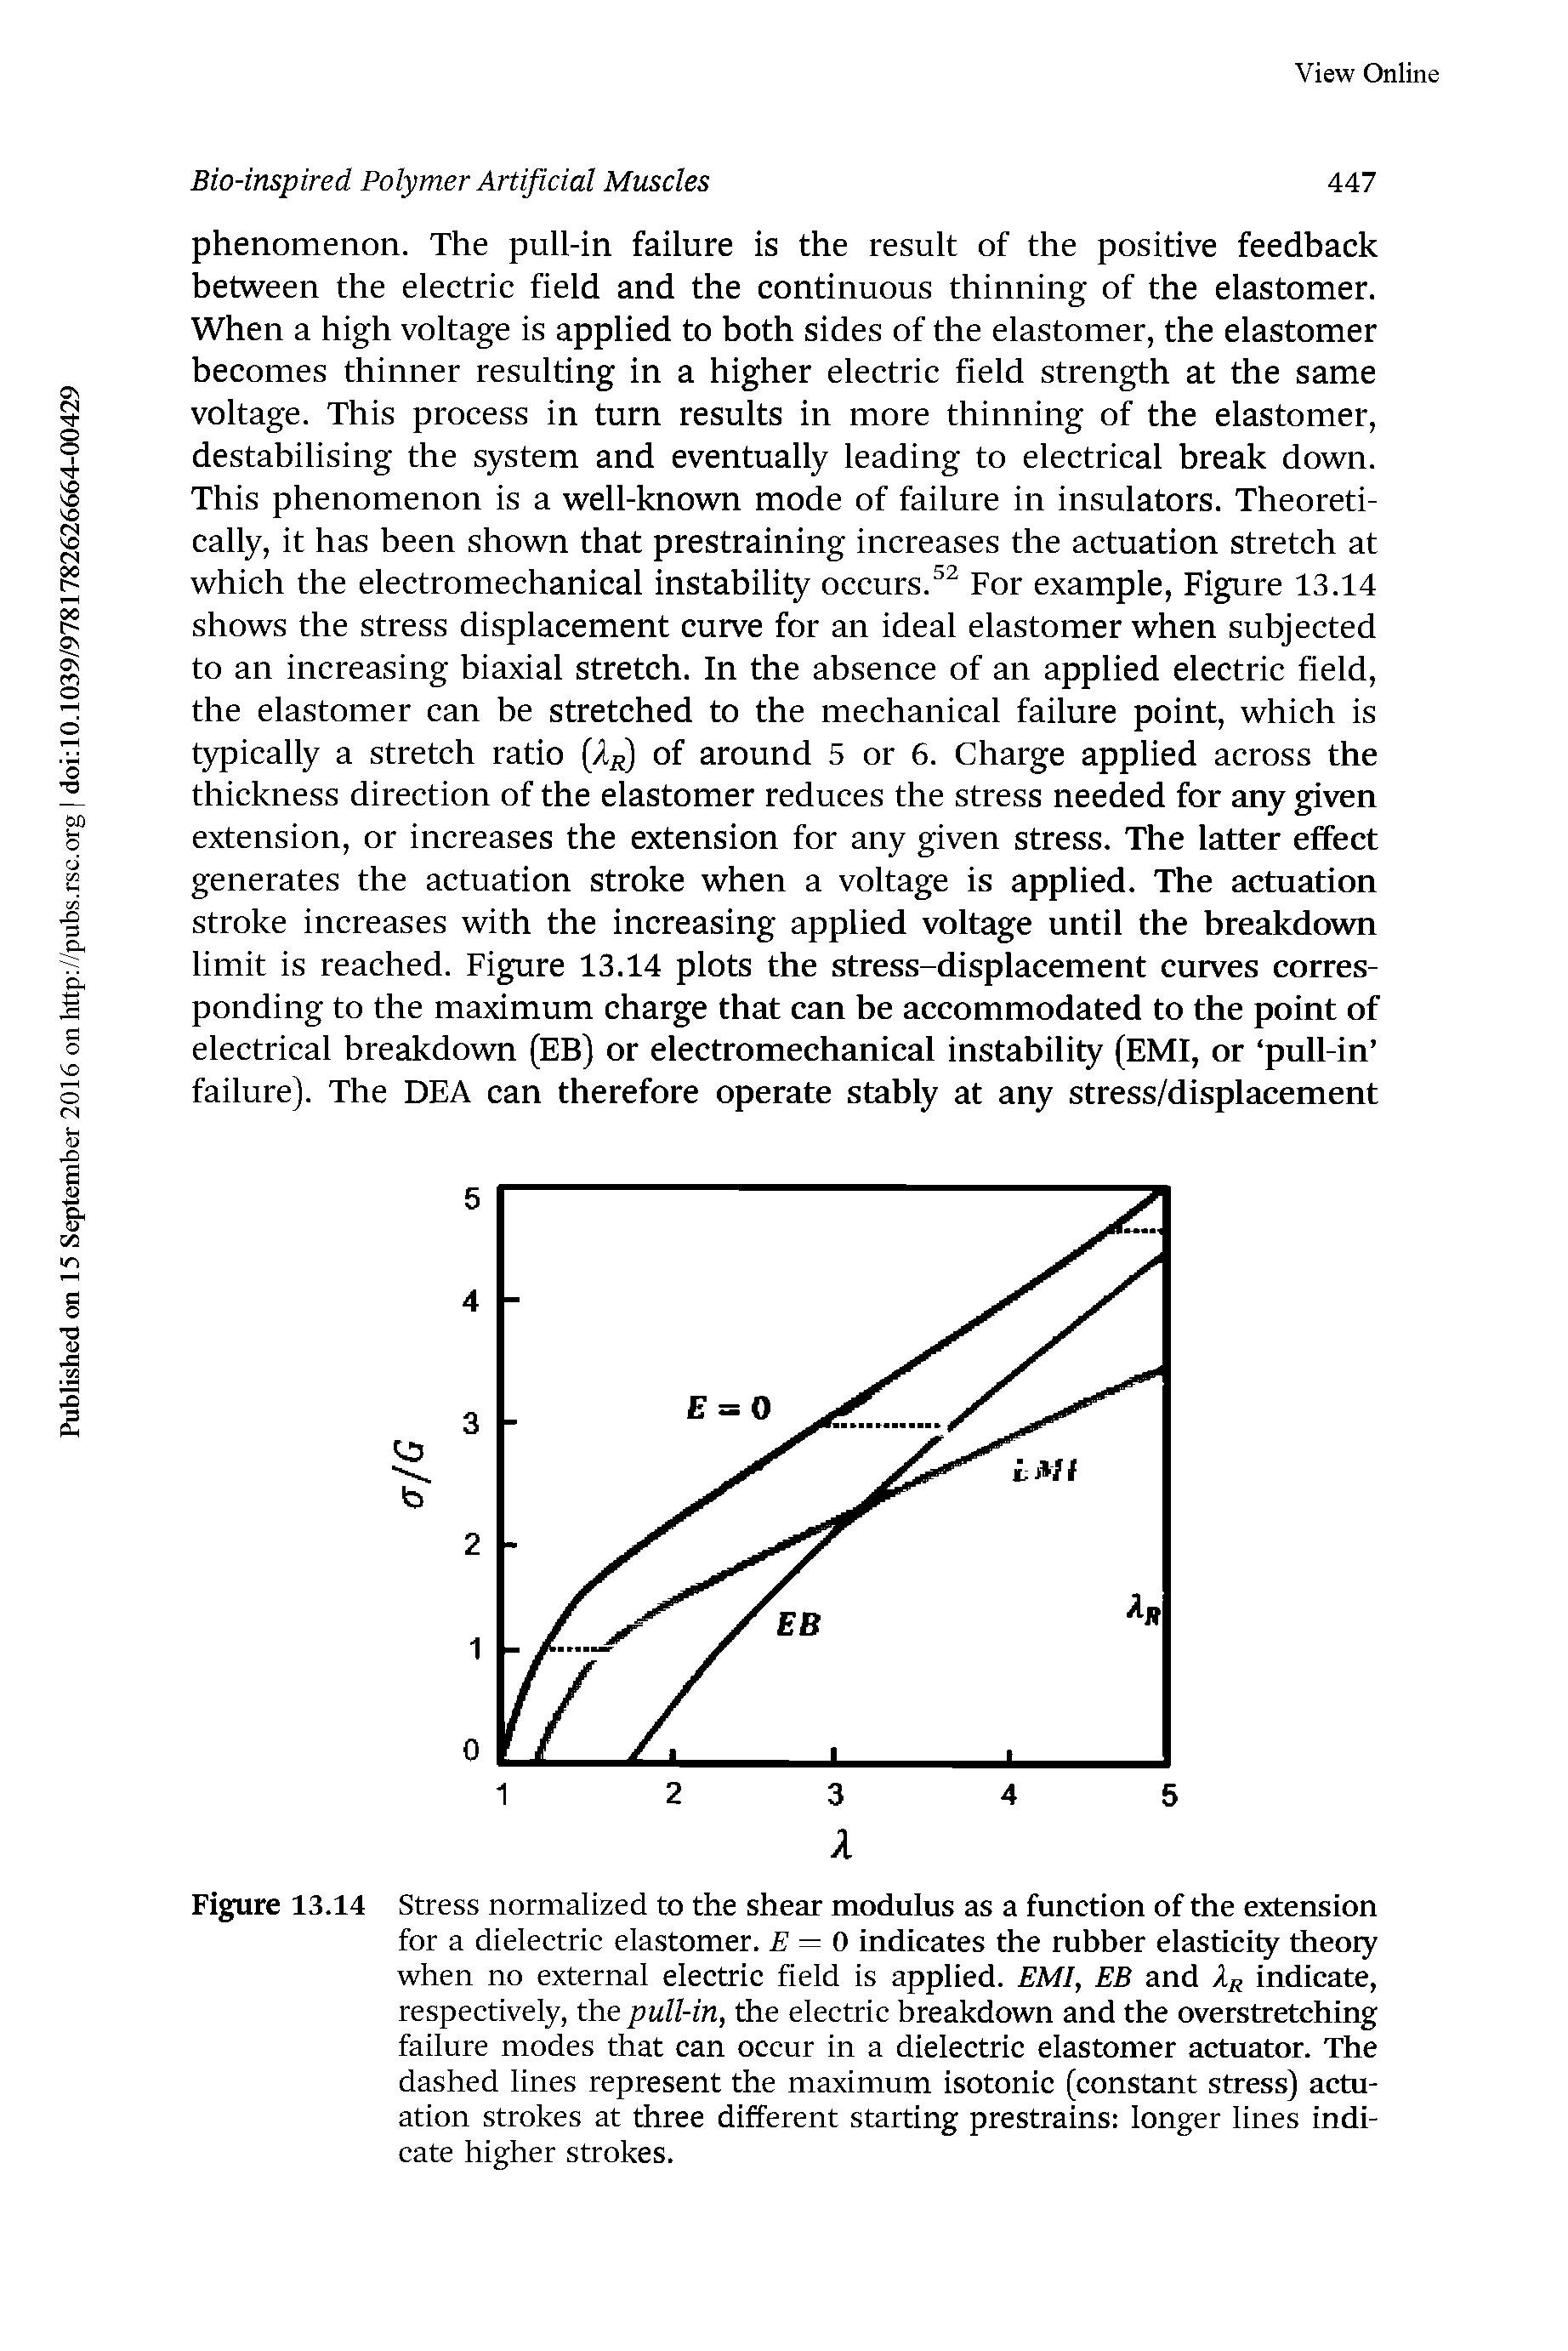 Figure 13.14 Stress normalized to the shear modulus as a function of the extension for a dielectric elastomer. E = 0 indicates the rubber elasticity theoiy when no external electric field is applied. EMI, EB and indicate, respectively, the pull-in, the electric breakdown and the overstretching failure modes that can occur in a dielectric elastomer actuator. The dashed lines represent the maximum isotonic (constant stress) aetu-ation strokes at three different starting prestrains longer lines indicate higher strokes.